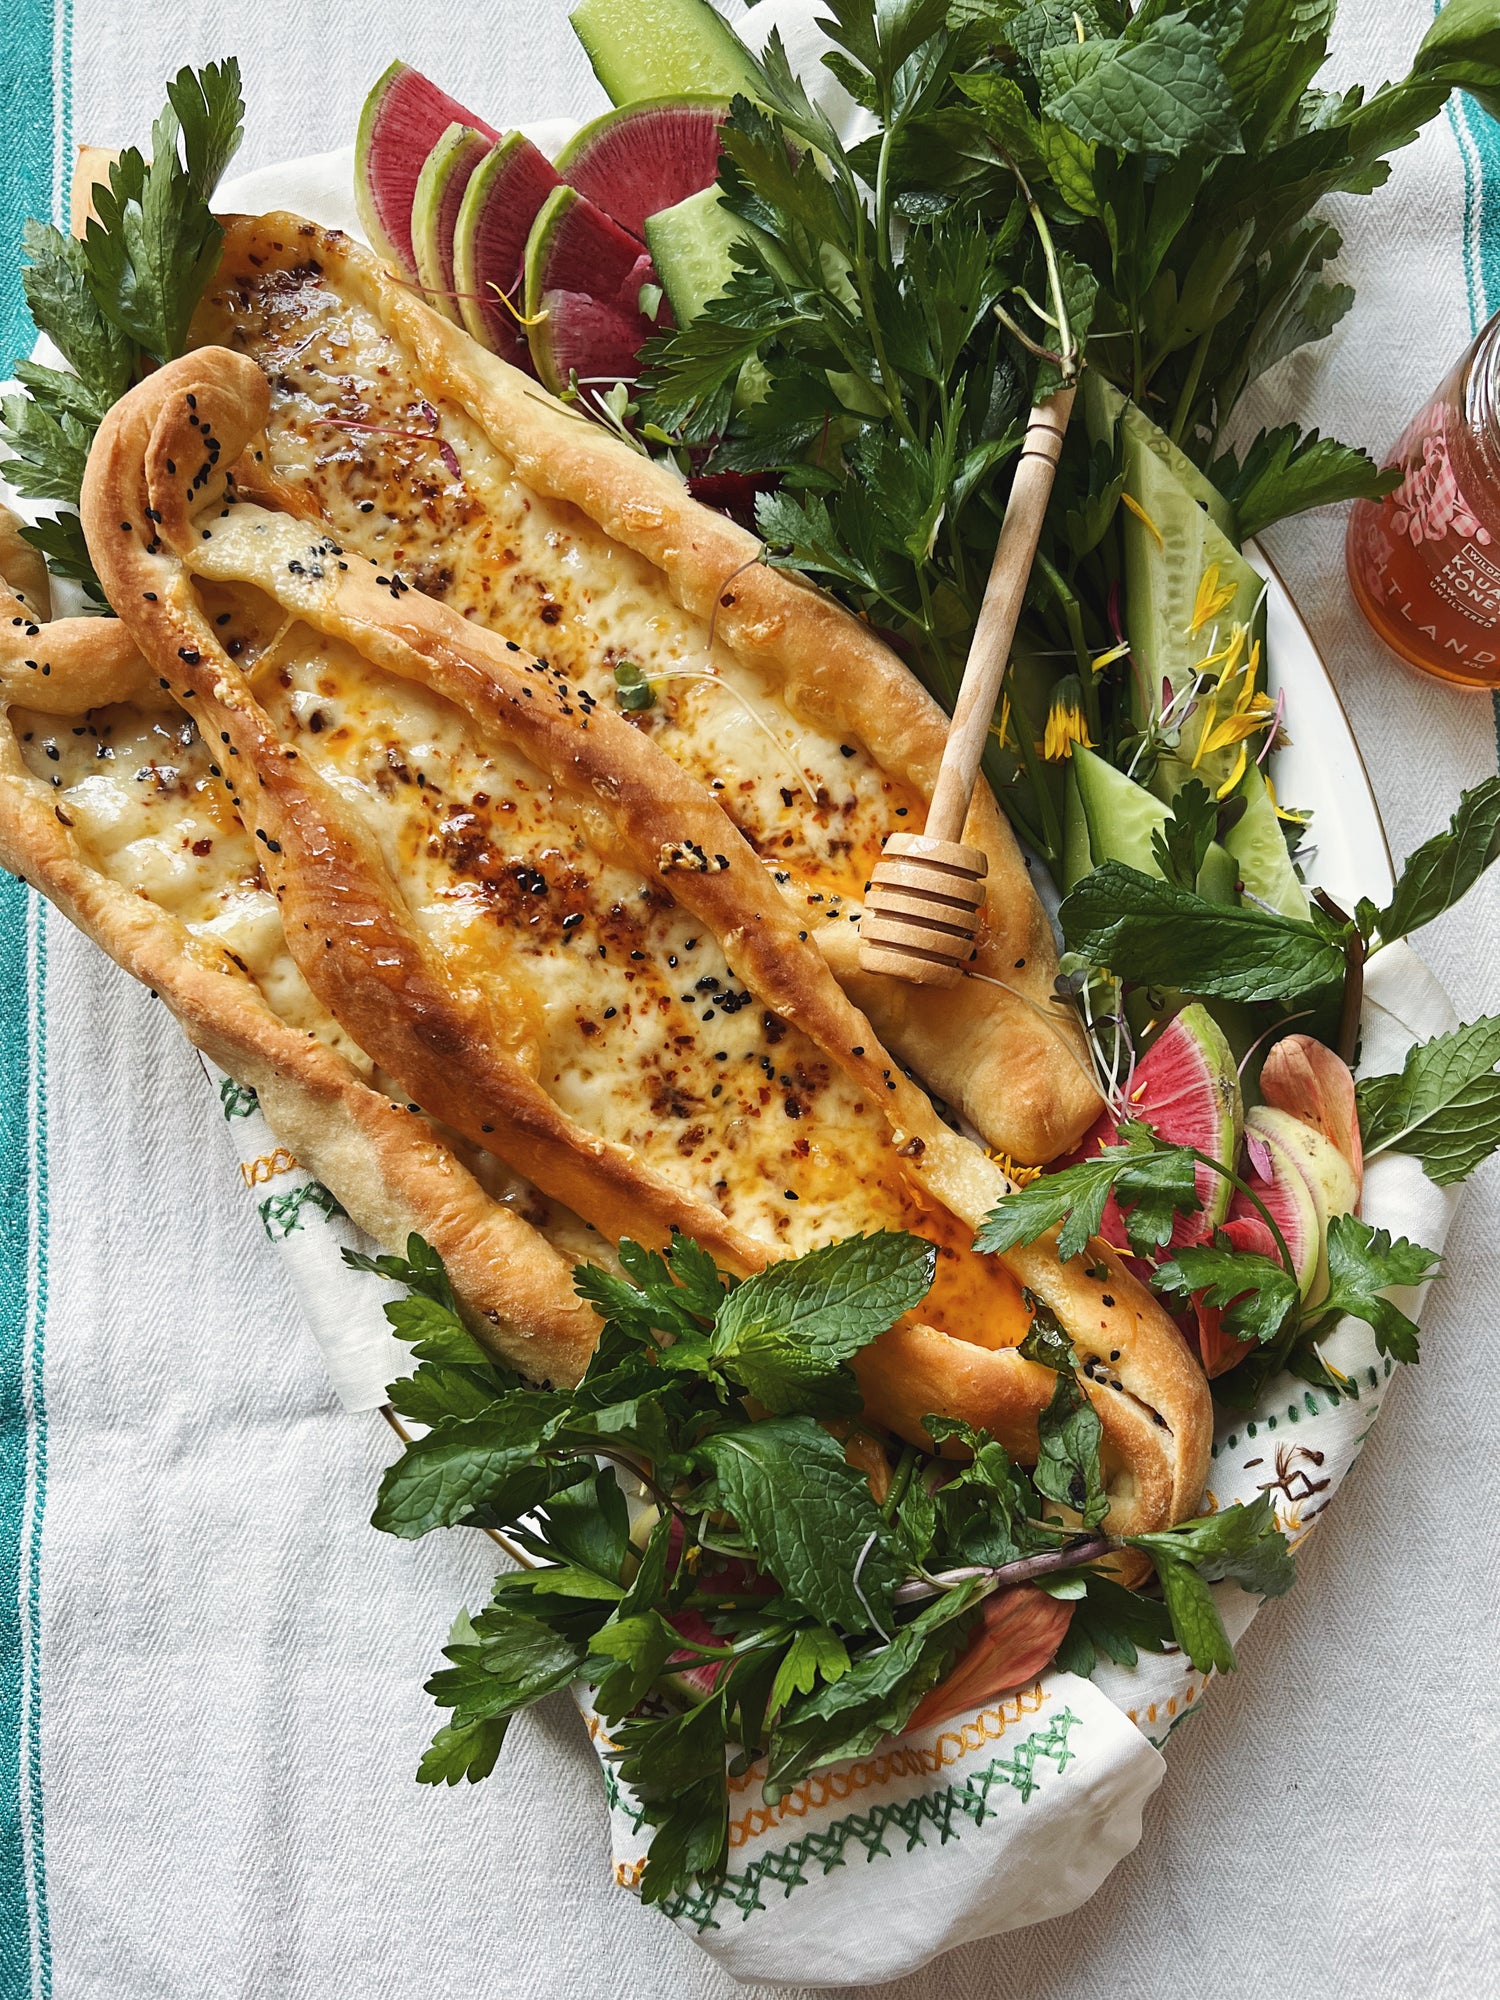 Turkish Cheese Pide with Chili, Honey, and Herbs